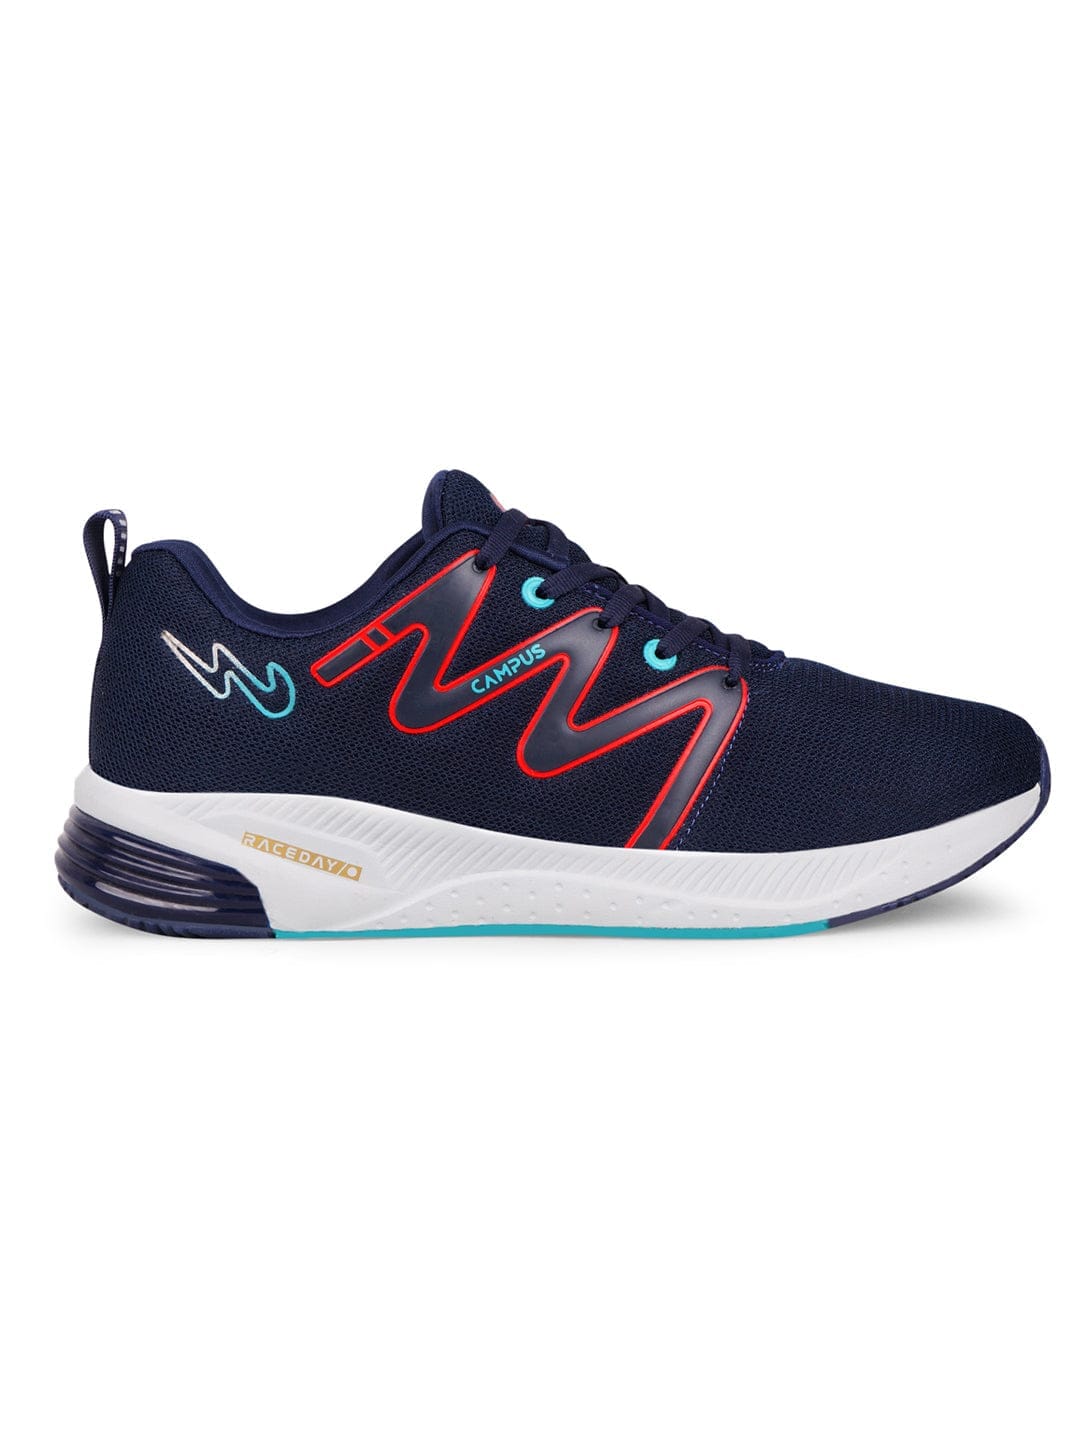 Buy CAMP-VISION Navy Men's Running Shoes online | Campus Shoes